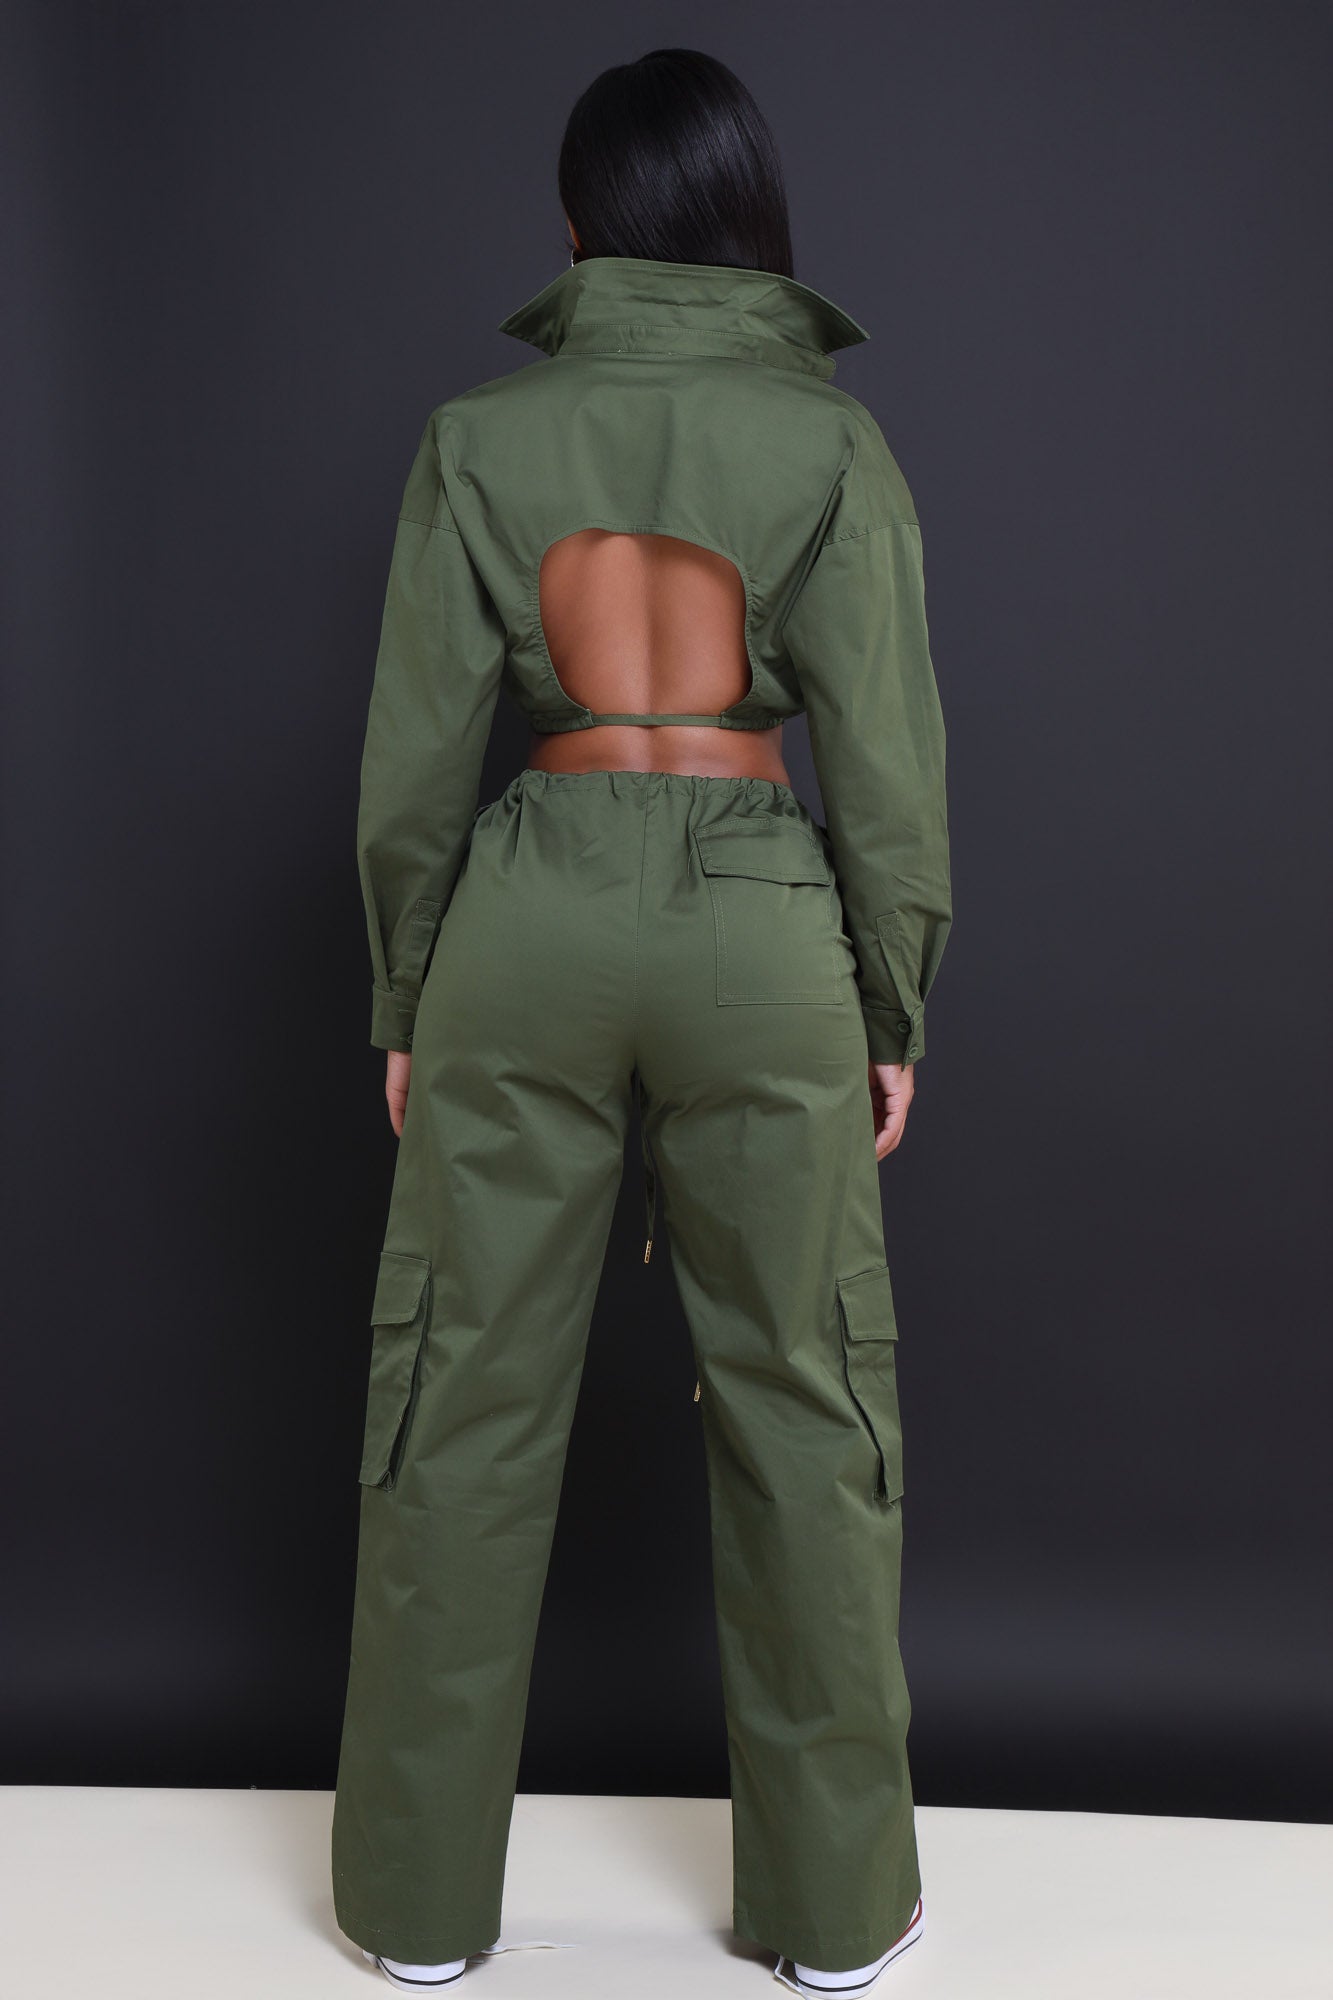 Outfit Of The Day: Olive Green Bomber Jacket & Cargo Pants